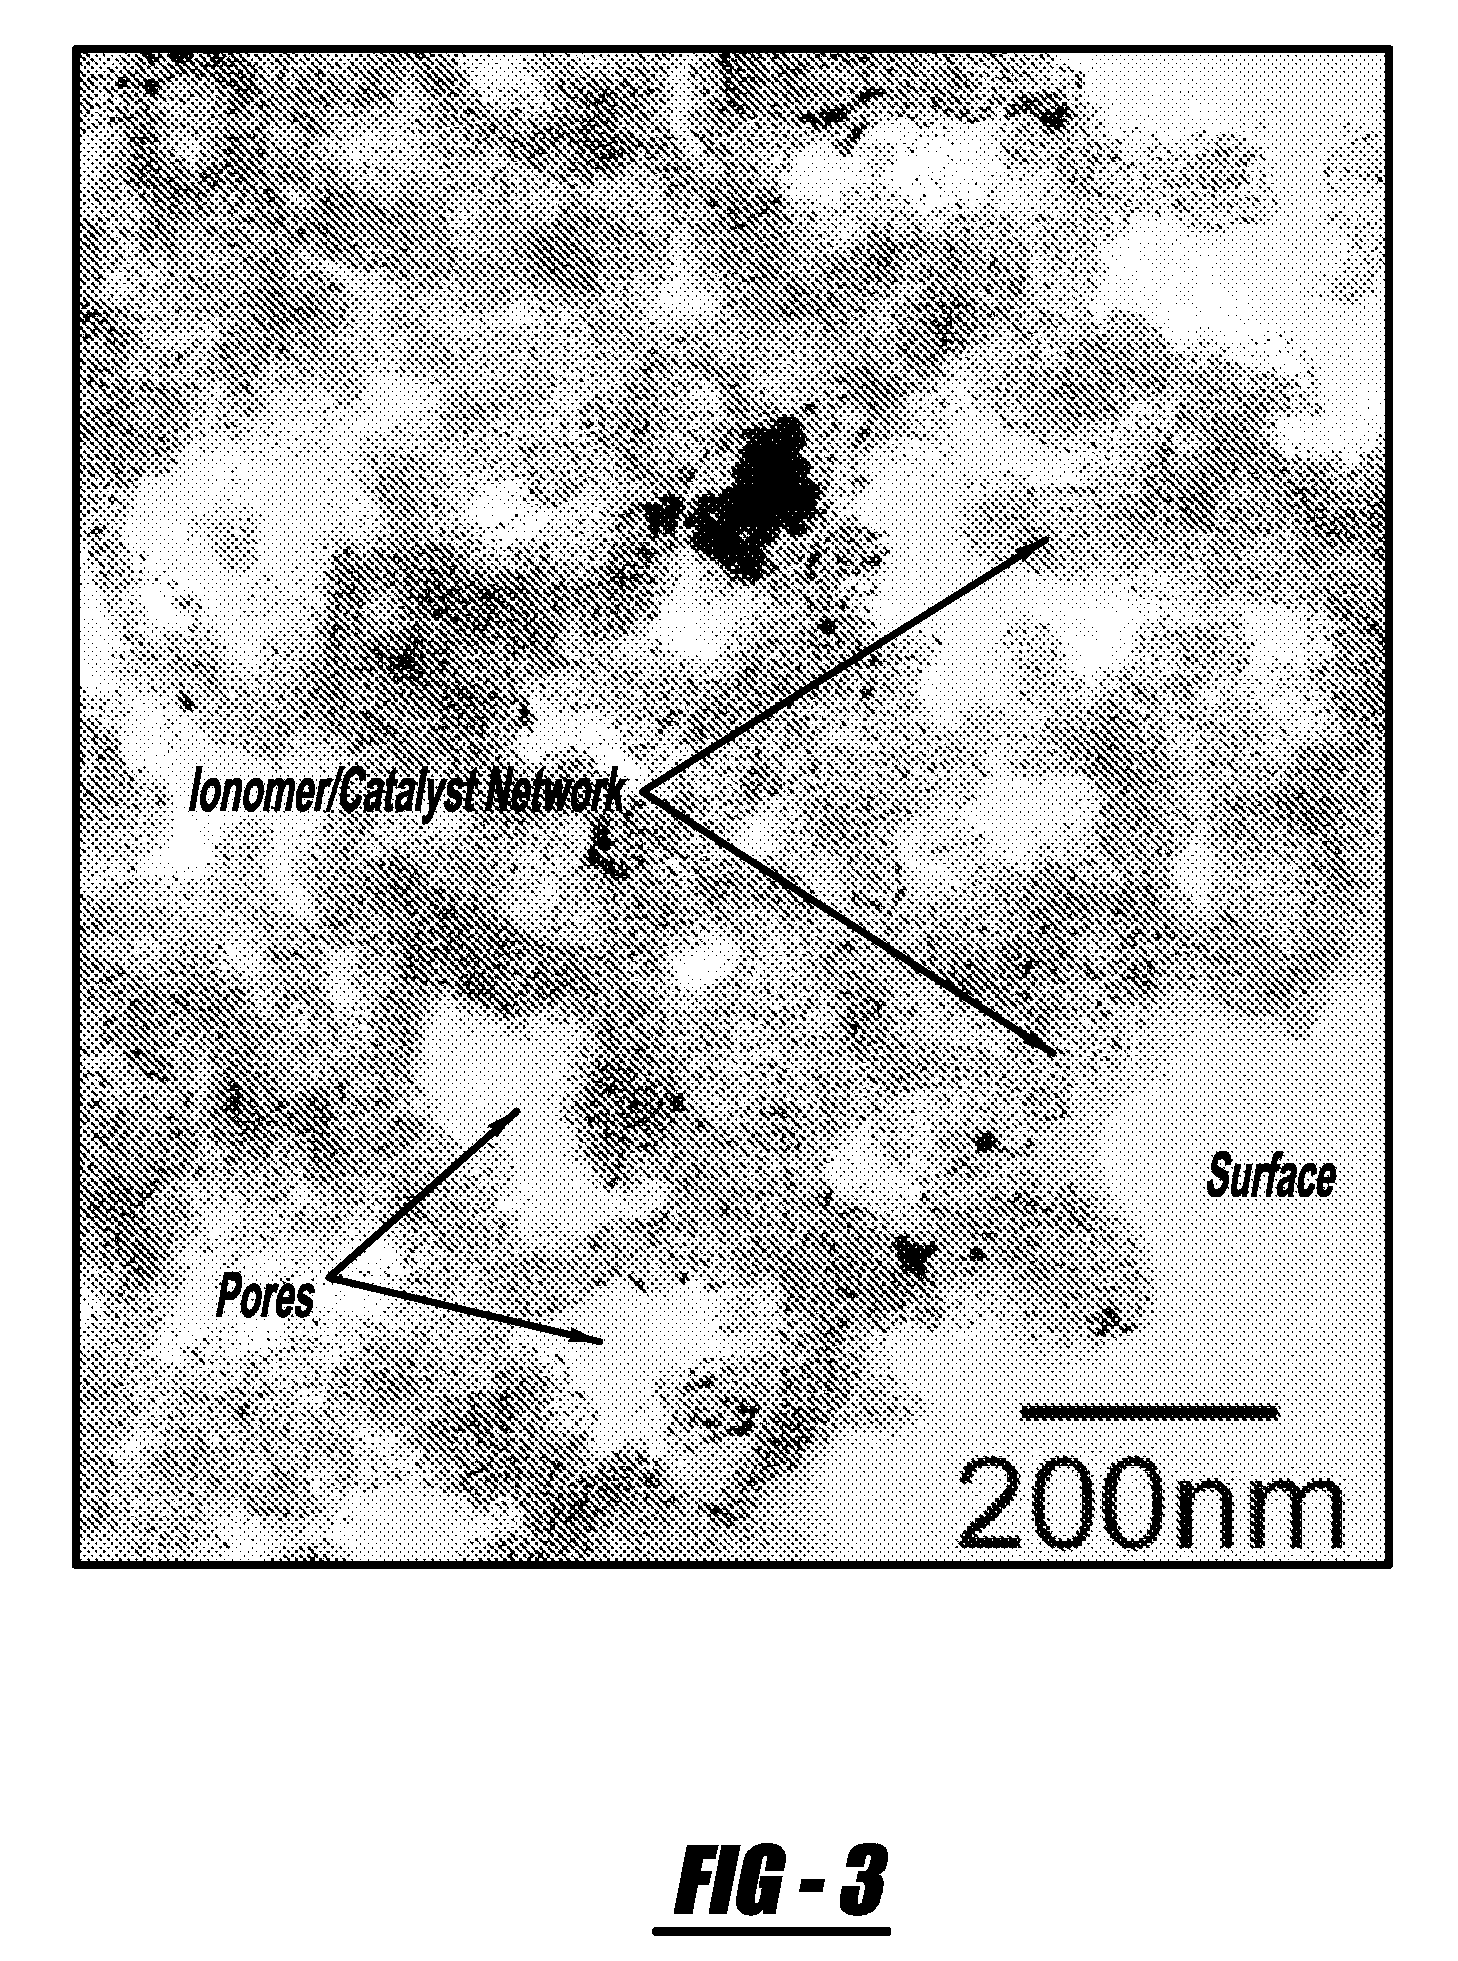 Method for Characterizing the Porosity in Fuel Cell Electrodes